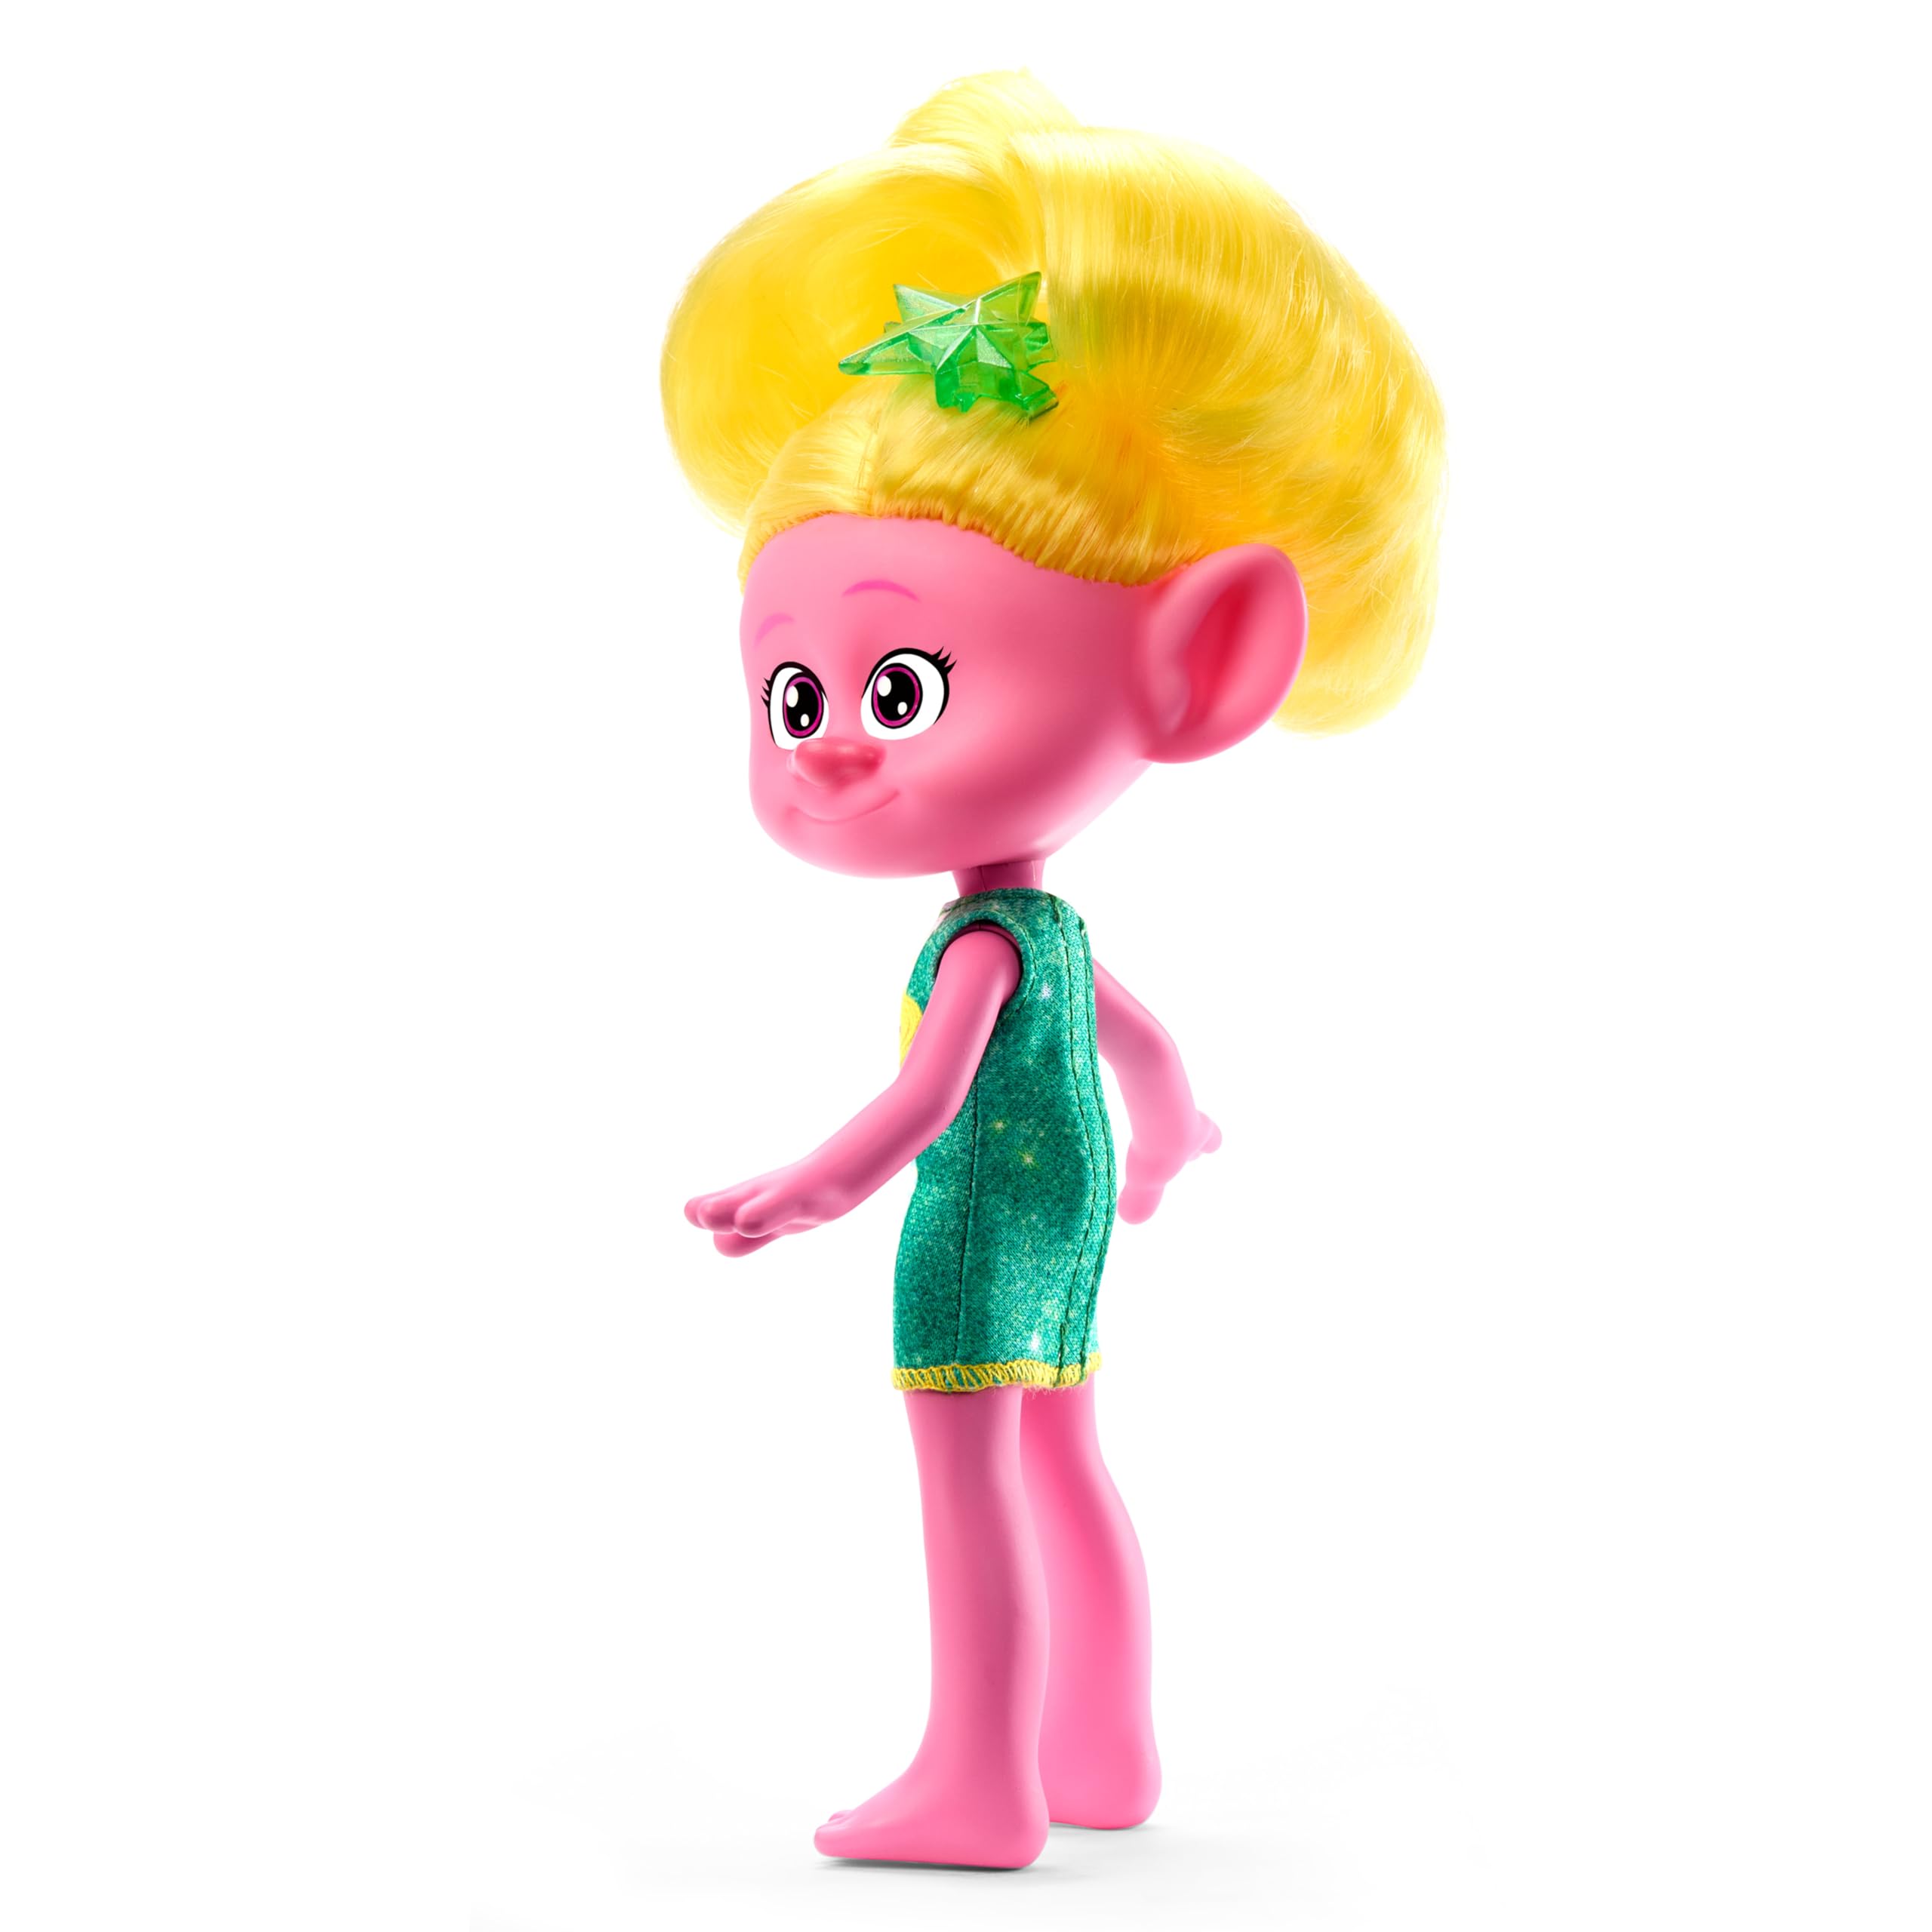 Mattel ​DreamWorks Trolls Band Together Trendsettin’ Fashion Dolls, Viva with Vibrant Hair & Accessory, Toys Inspired by the Movie